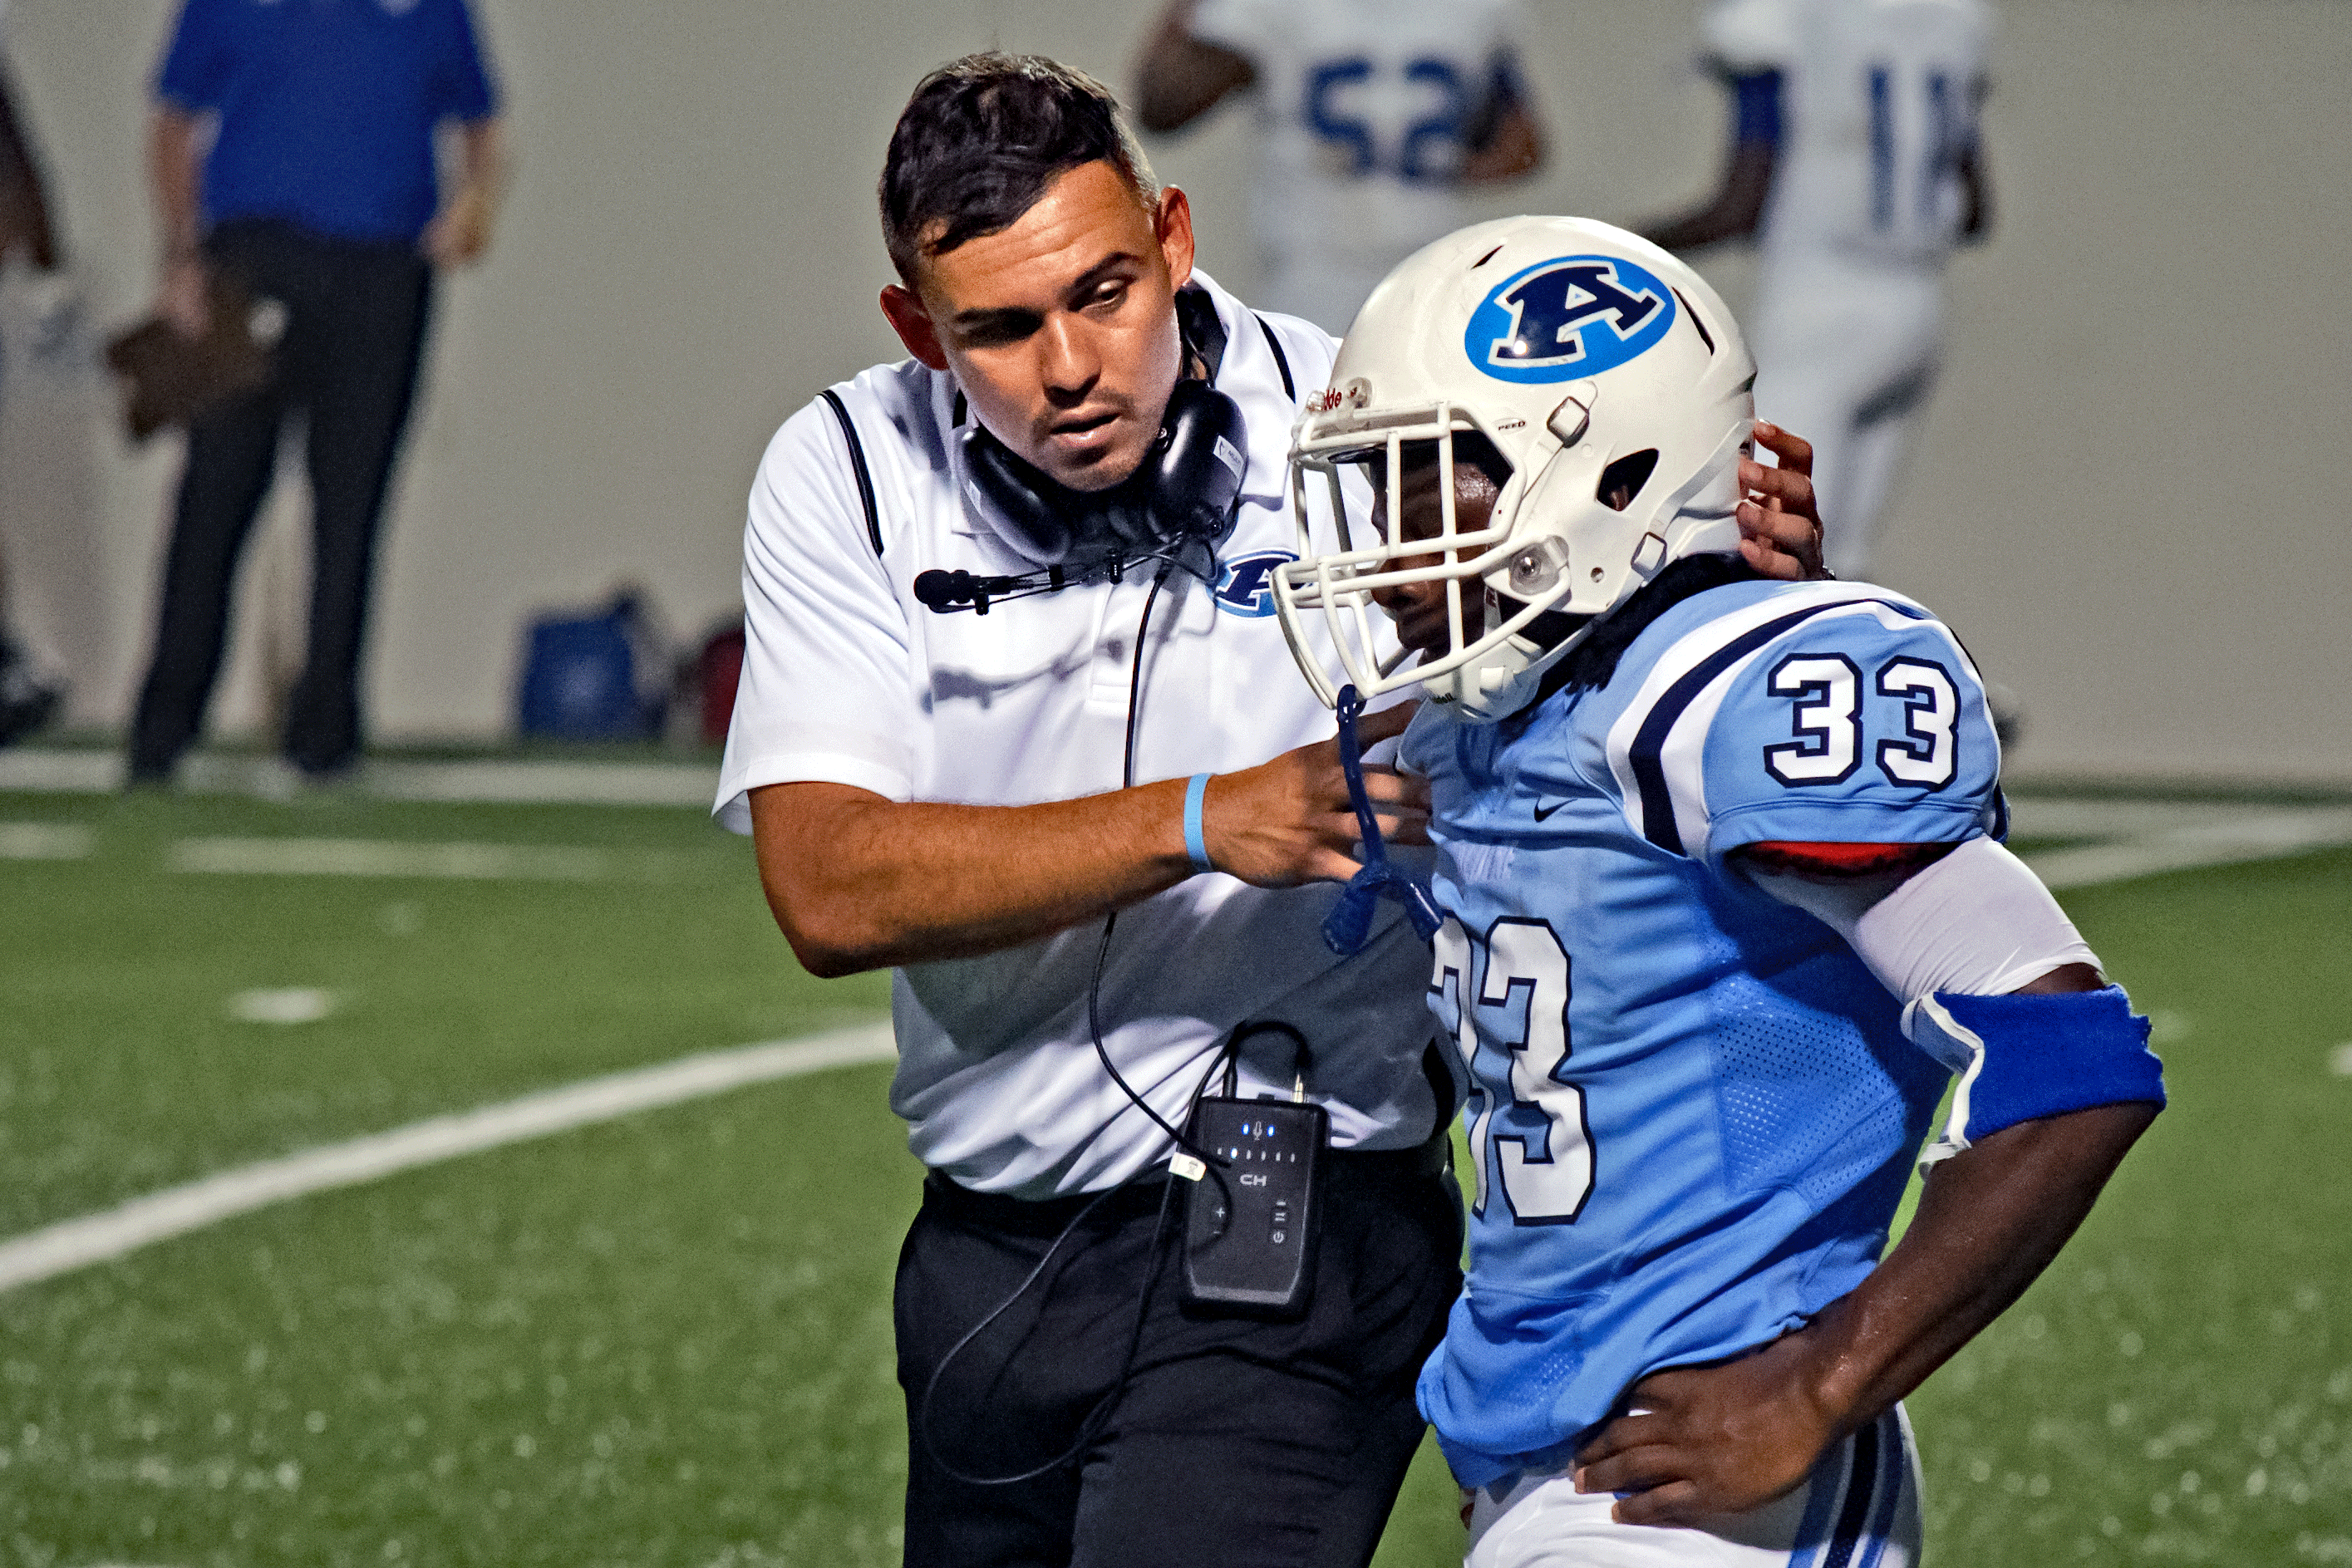 Aldine head coach James Kowalewski gives pointers to Mustang RB Michael McLennon during the 2016 season.